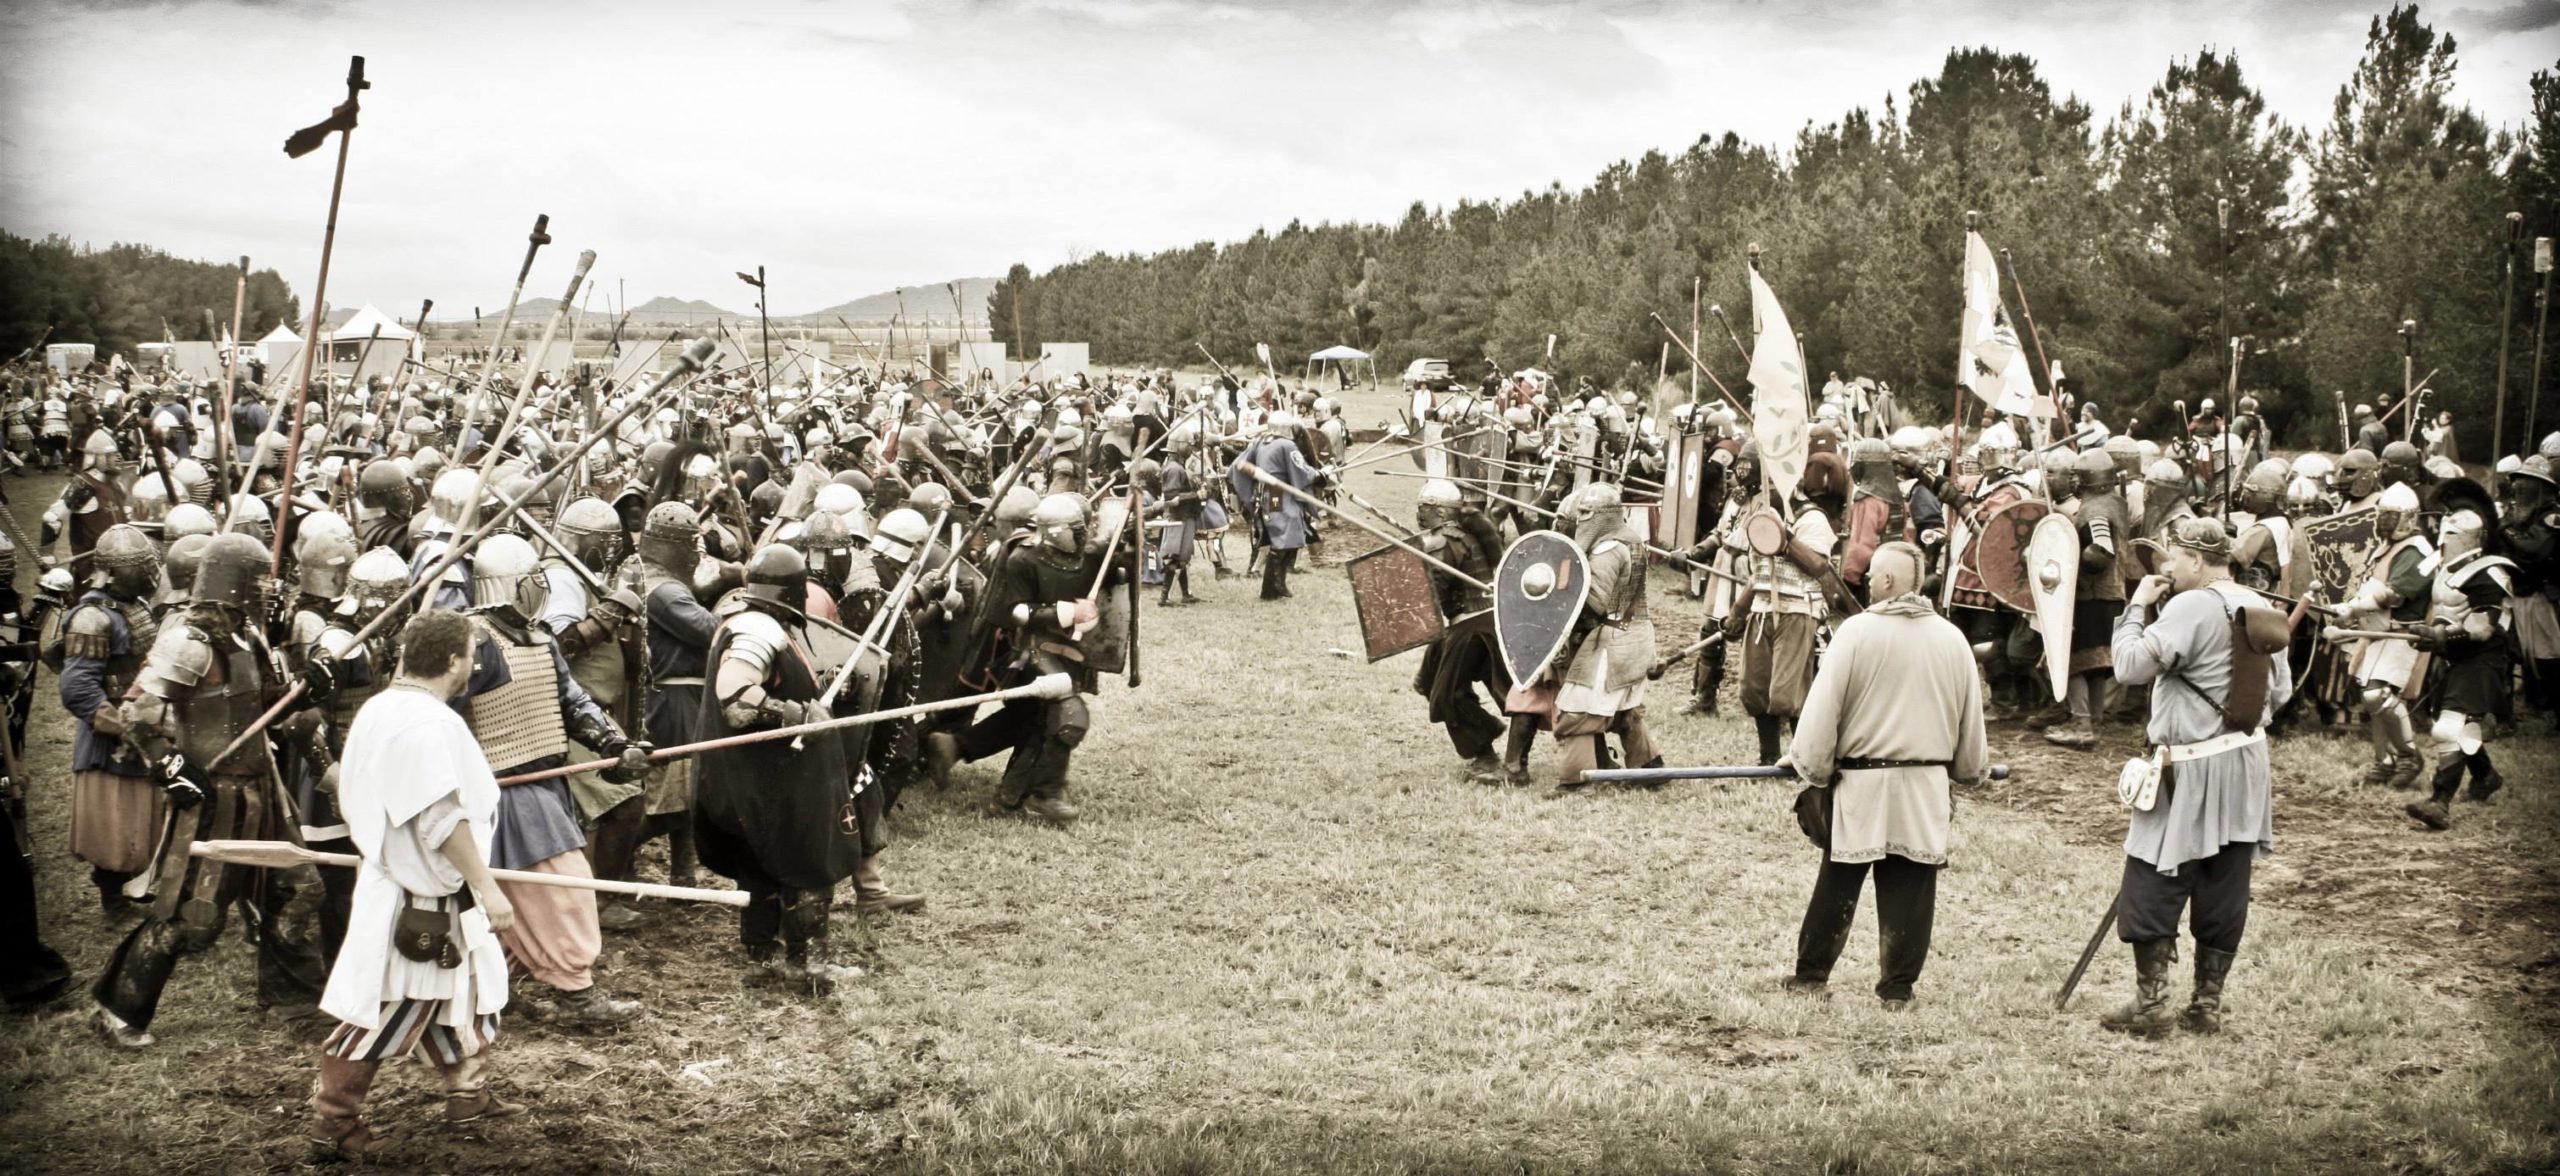 Warriors in armor at the start of a battle